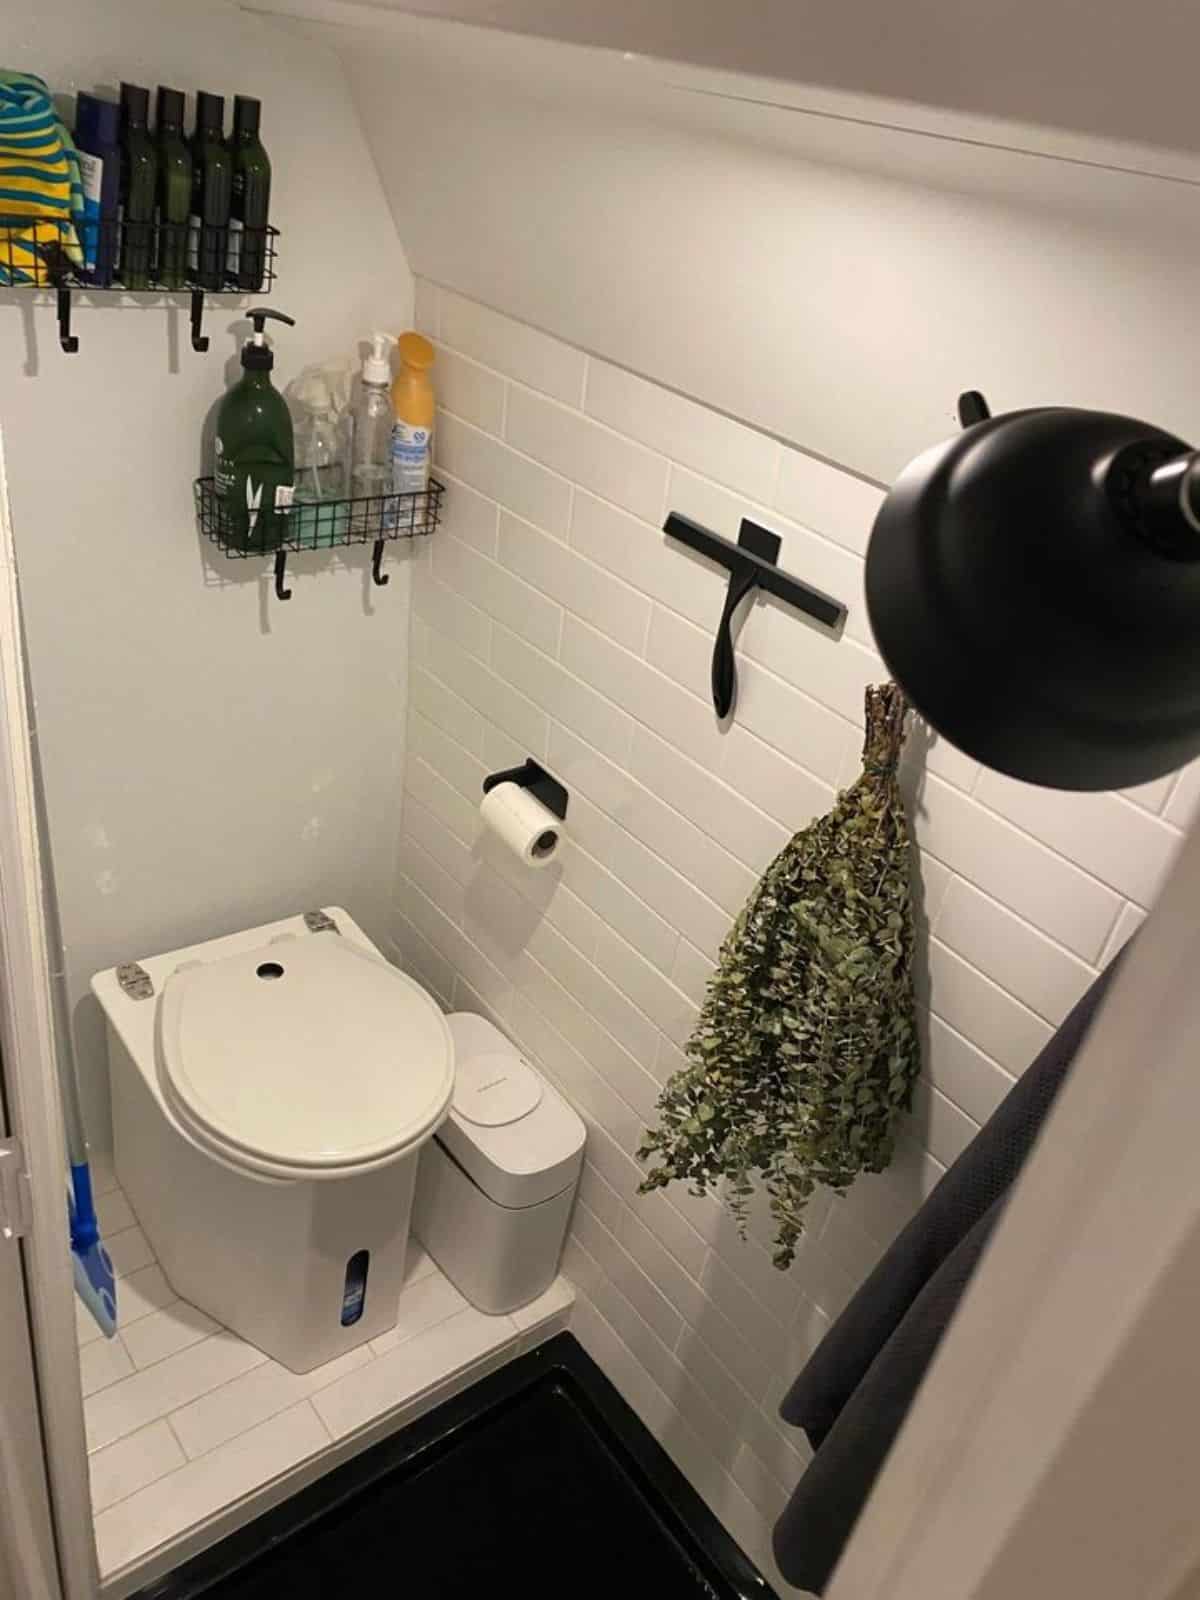 Standard toilet plus shower area in bathroom of Professionally Built Tiny Home on wheels